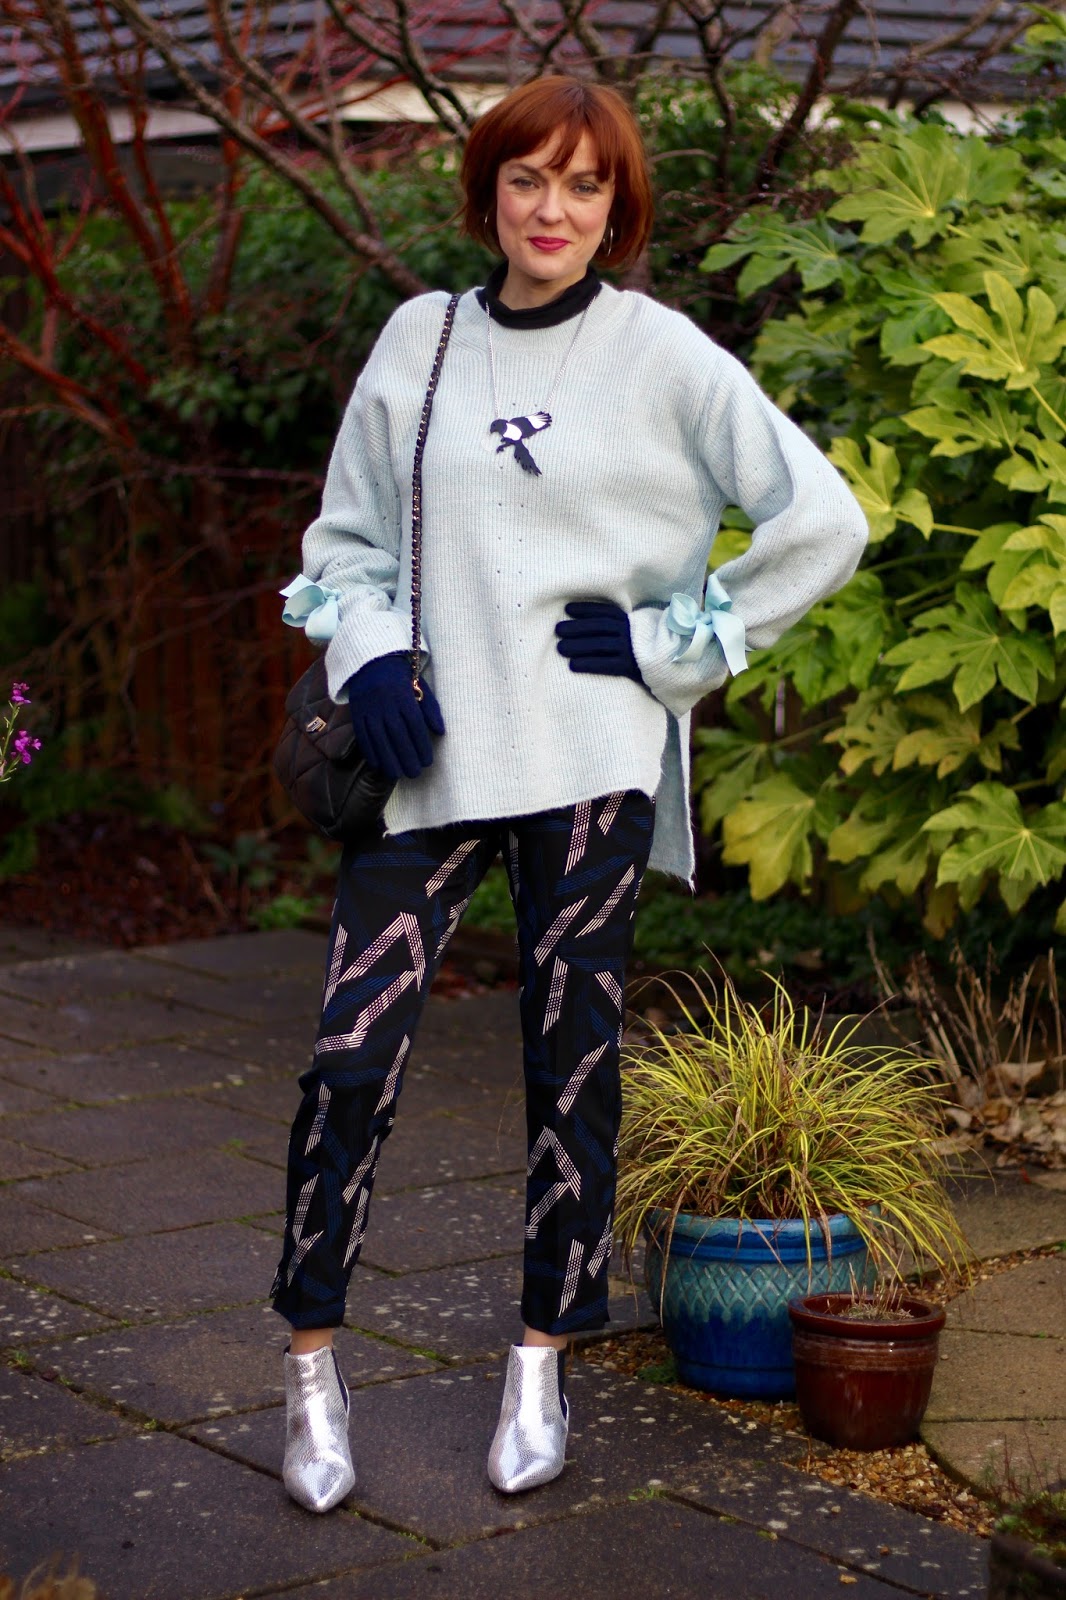 Oversized Topshop Jumper with Statement sleeves, patterned trousers and silver boots | Fake fabulous - style over 40.